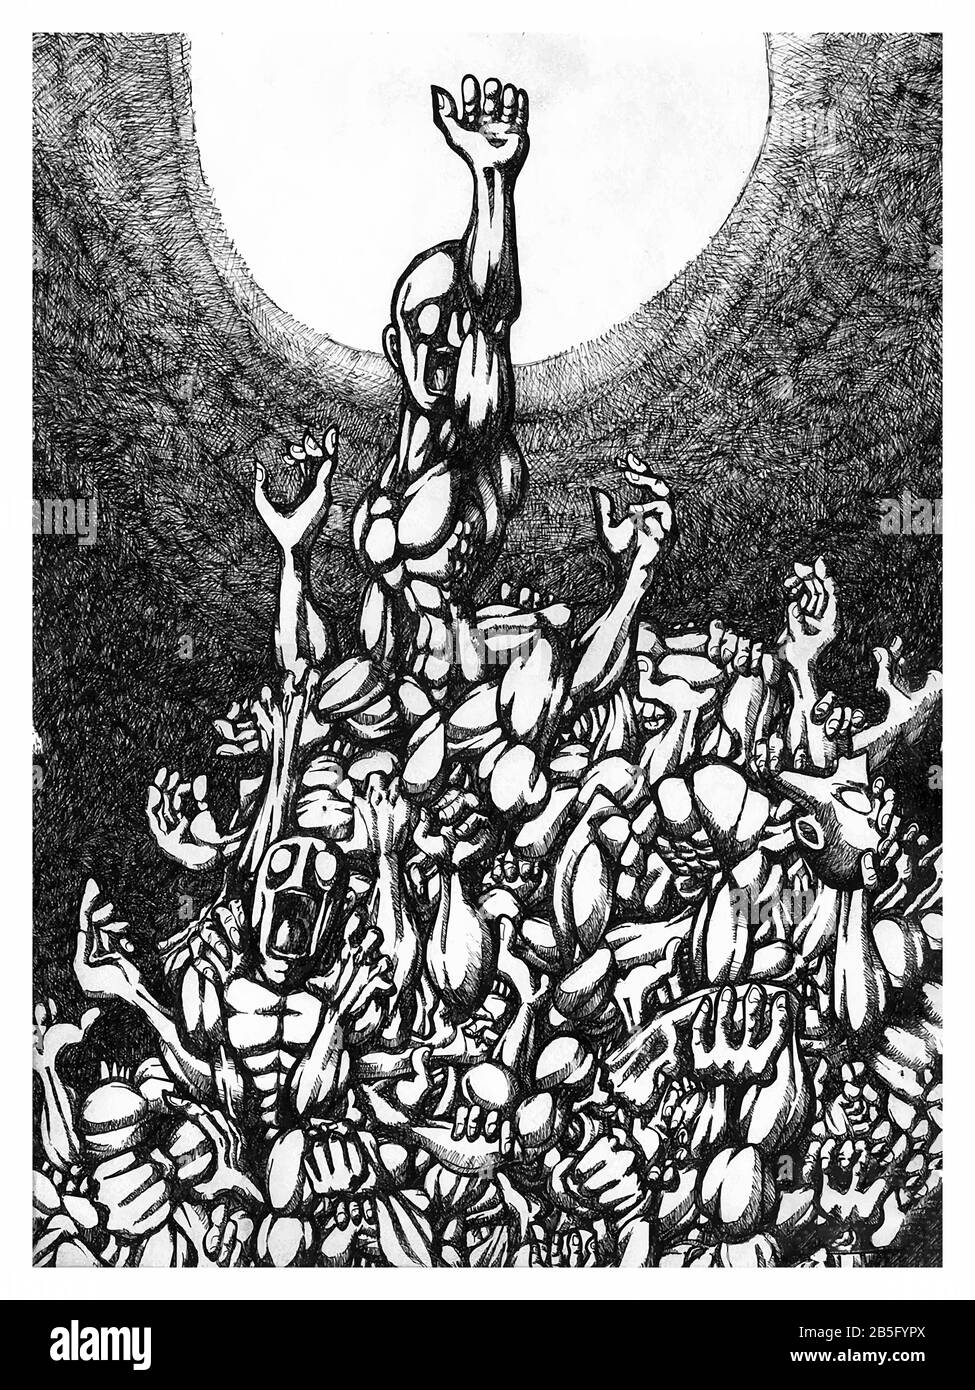 Ink Drawing (Hatch Work) of Crowd Trying to get Freedom in a Textured Unique Style. Artistic Manual Illustration turned to Vector. Pain, Agony Stock Vector